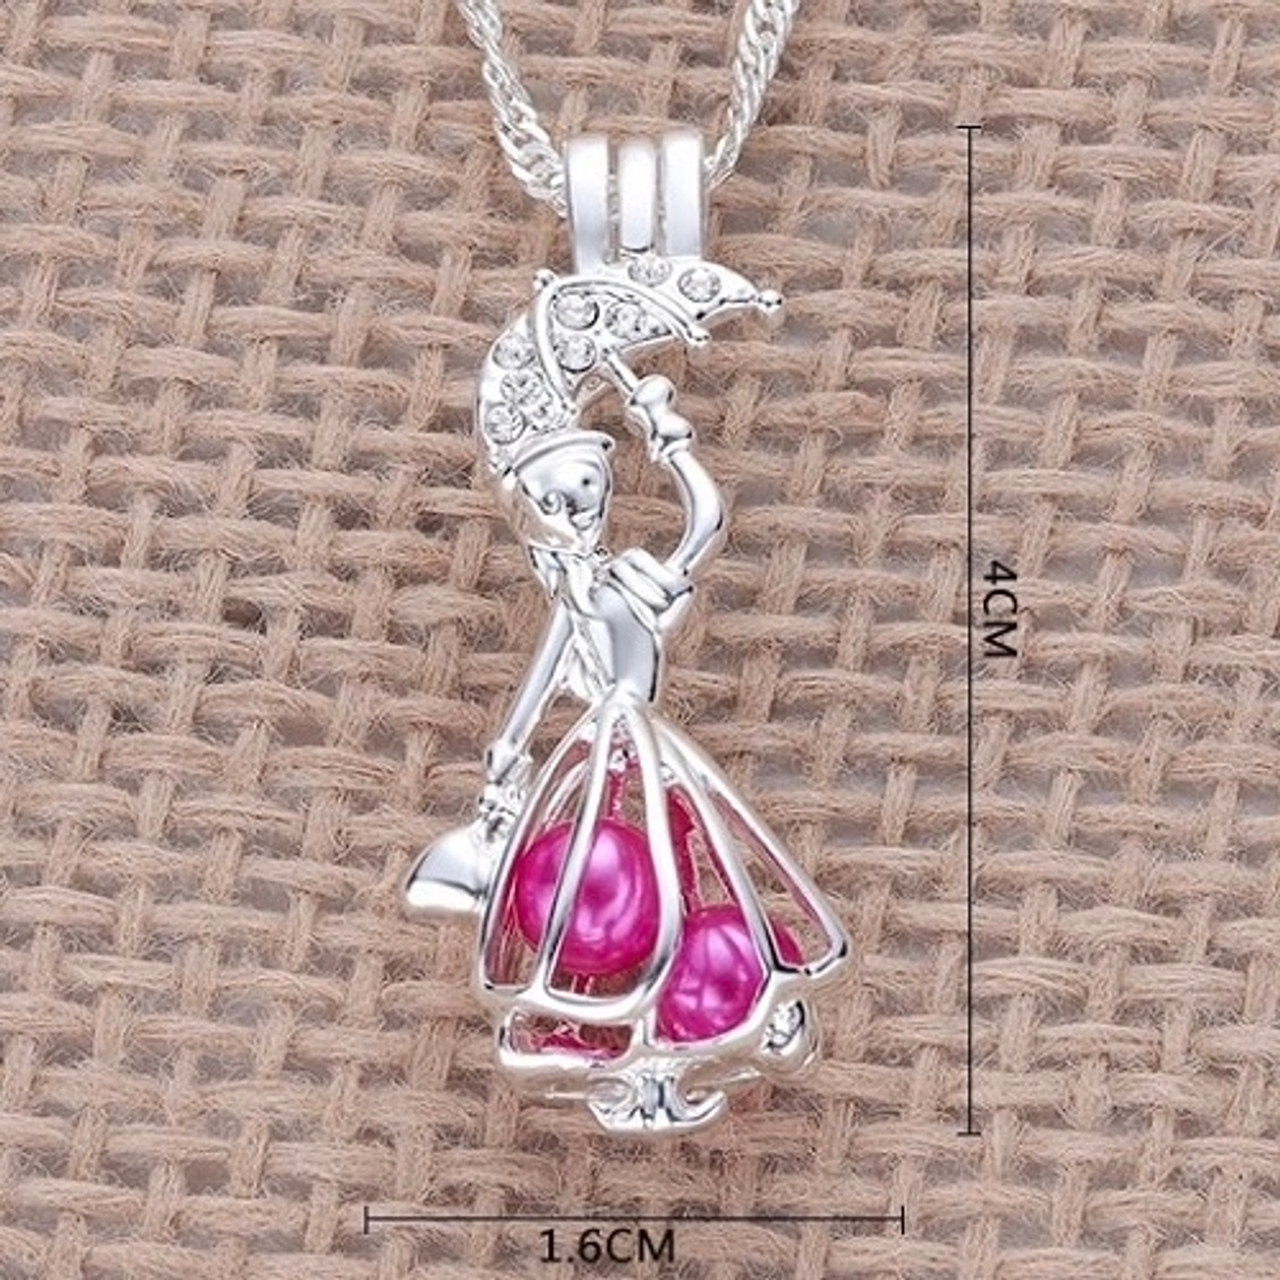 925 Sterling Silver Pearl NecklacesTwist Pearl Cages Pendant Necklace Charm  Pendant for Women Gifts